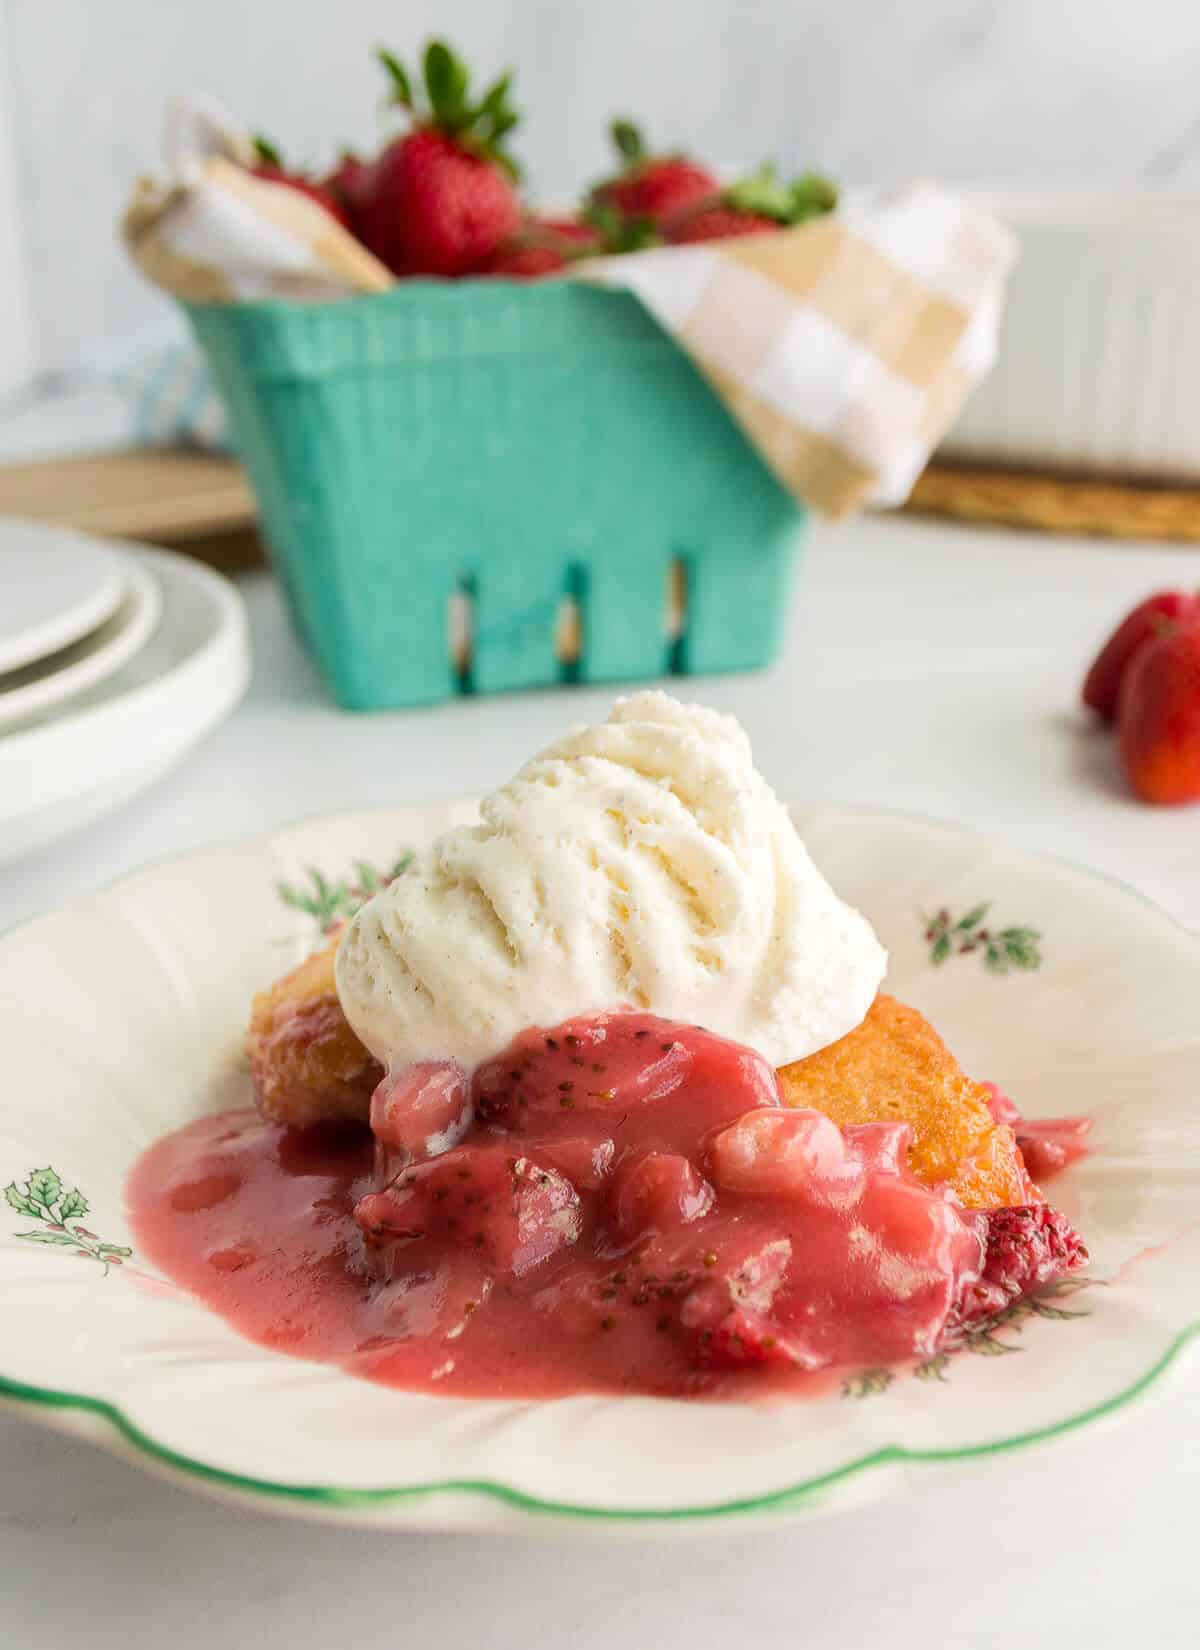 A white plate with a serving of strawberry cobbler and vanilla ice cream.